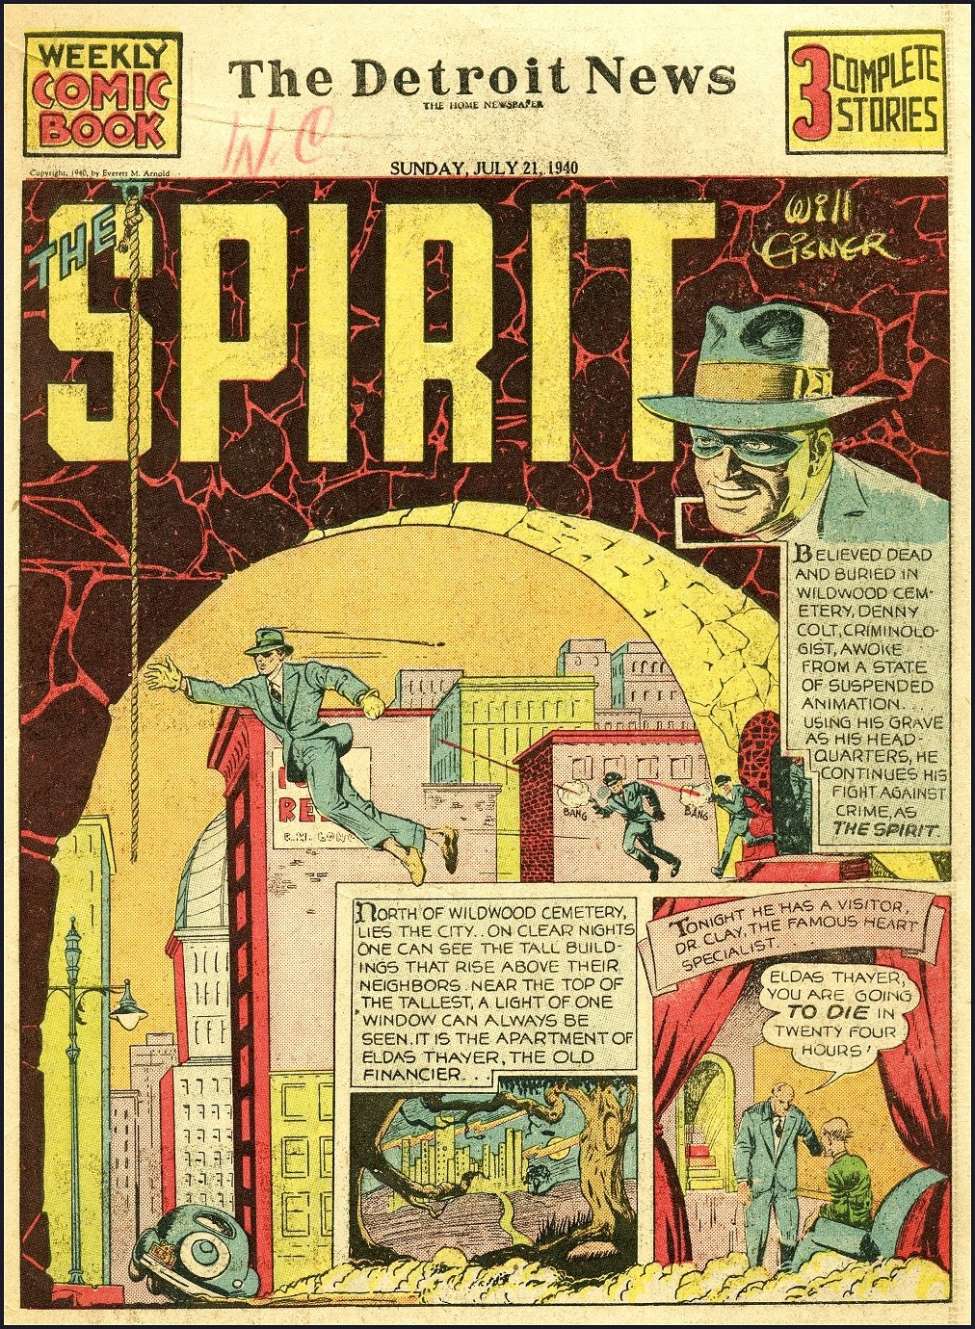 Comic Book Cover For The Spirit (1940-07-21) - Detroit News